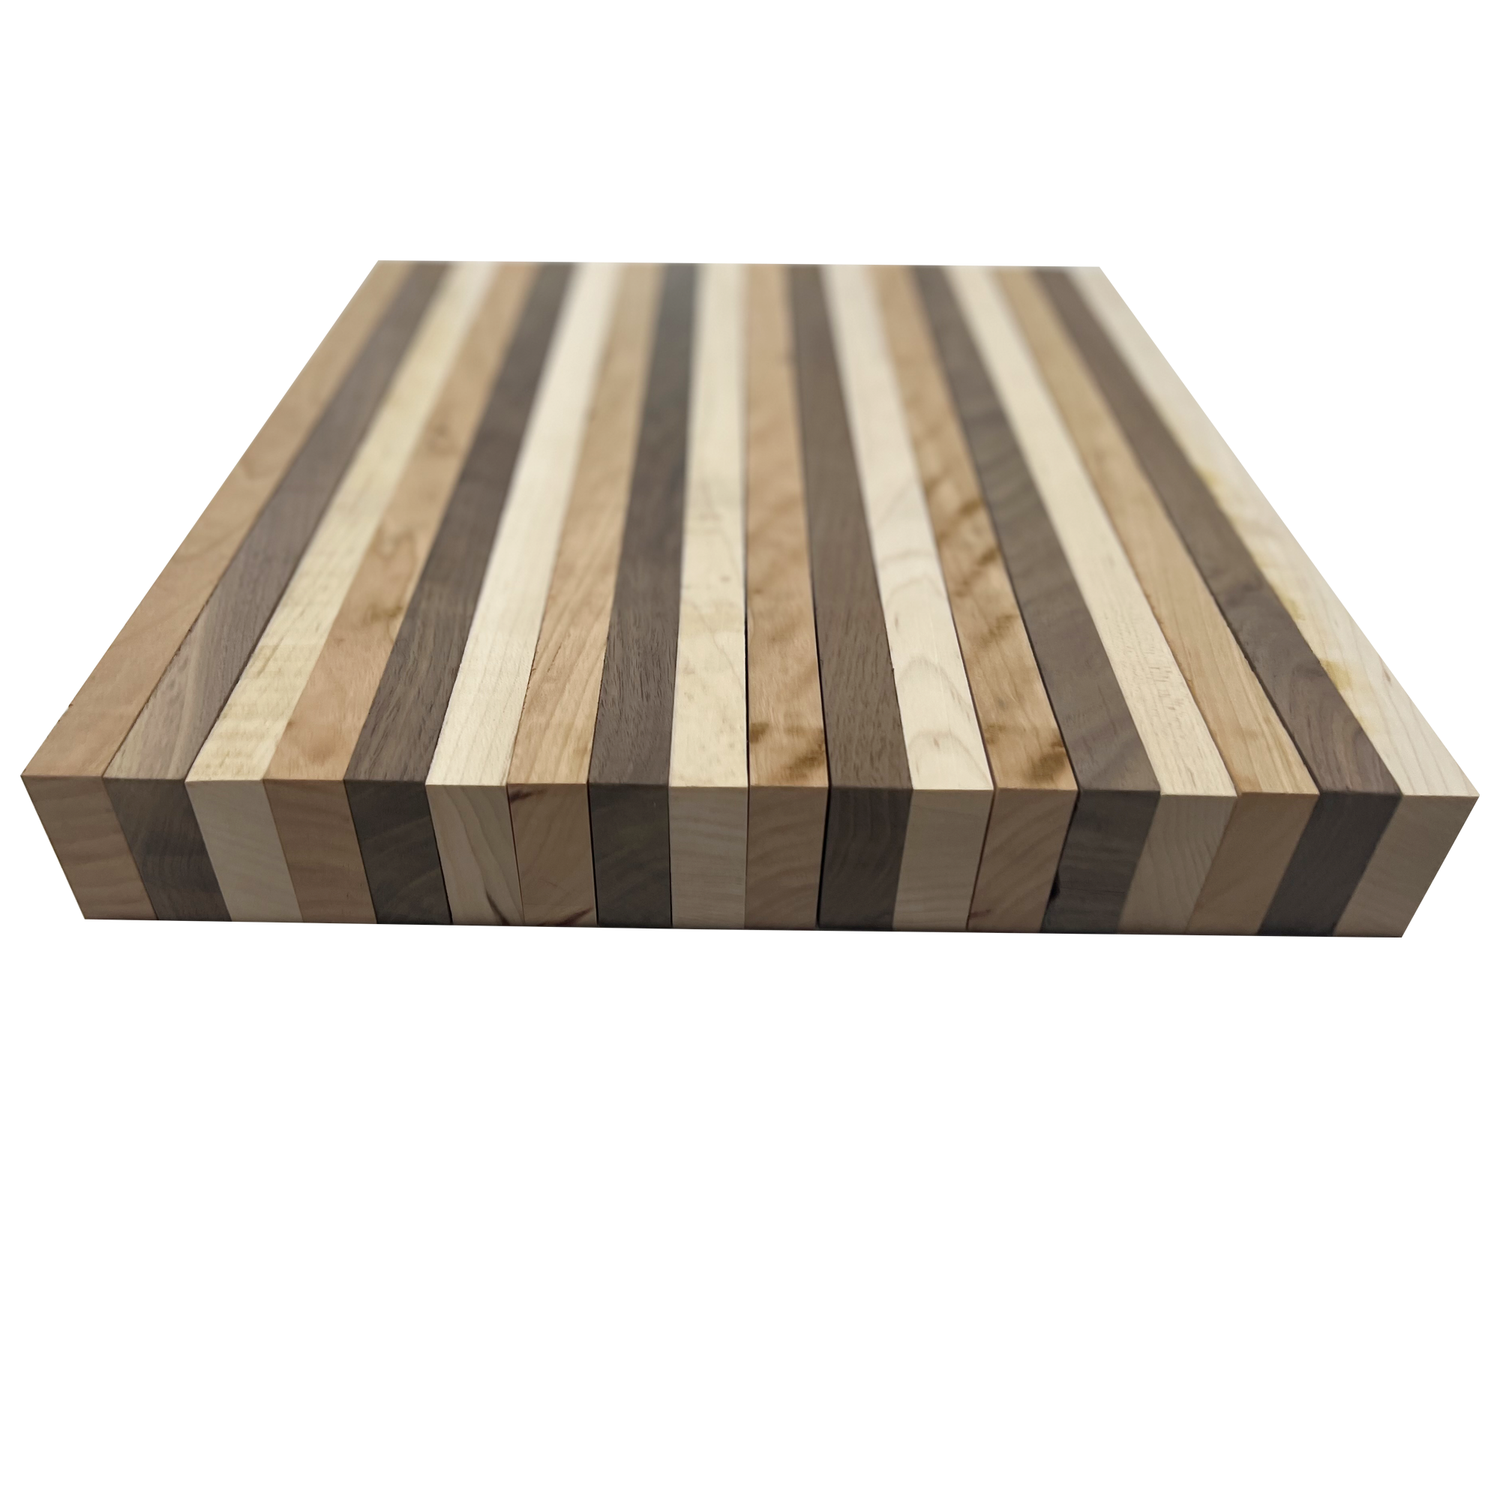 3/4” x 2” x 16” Combo of 6 Walnut 6 Cherry and 6 Hard Maple - 18 Boards - Exotic Wood Zone - Buy online Across USA 